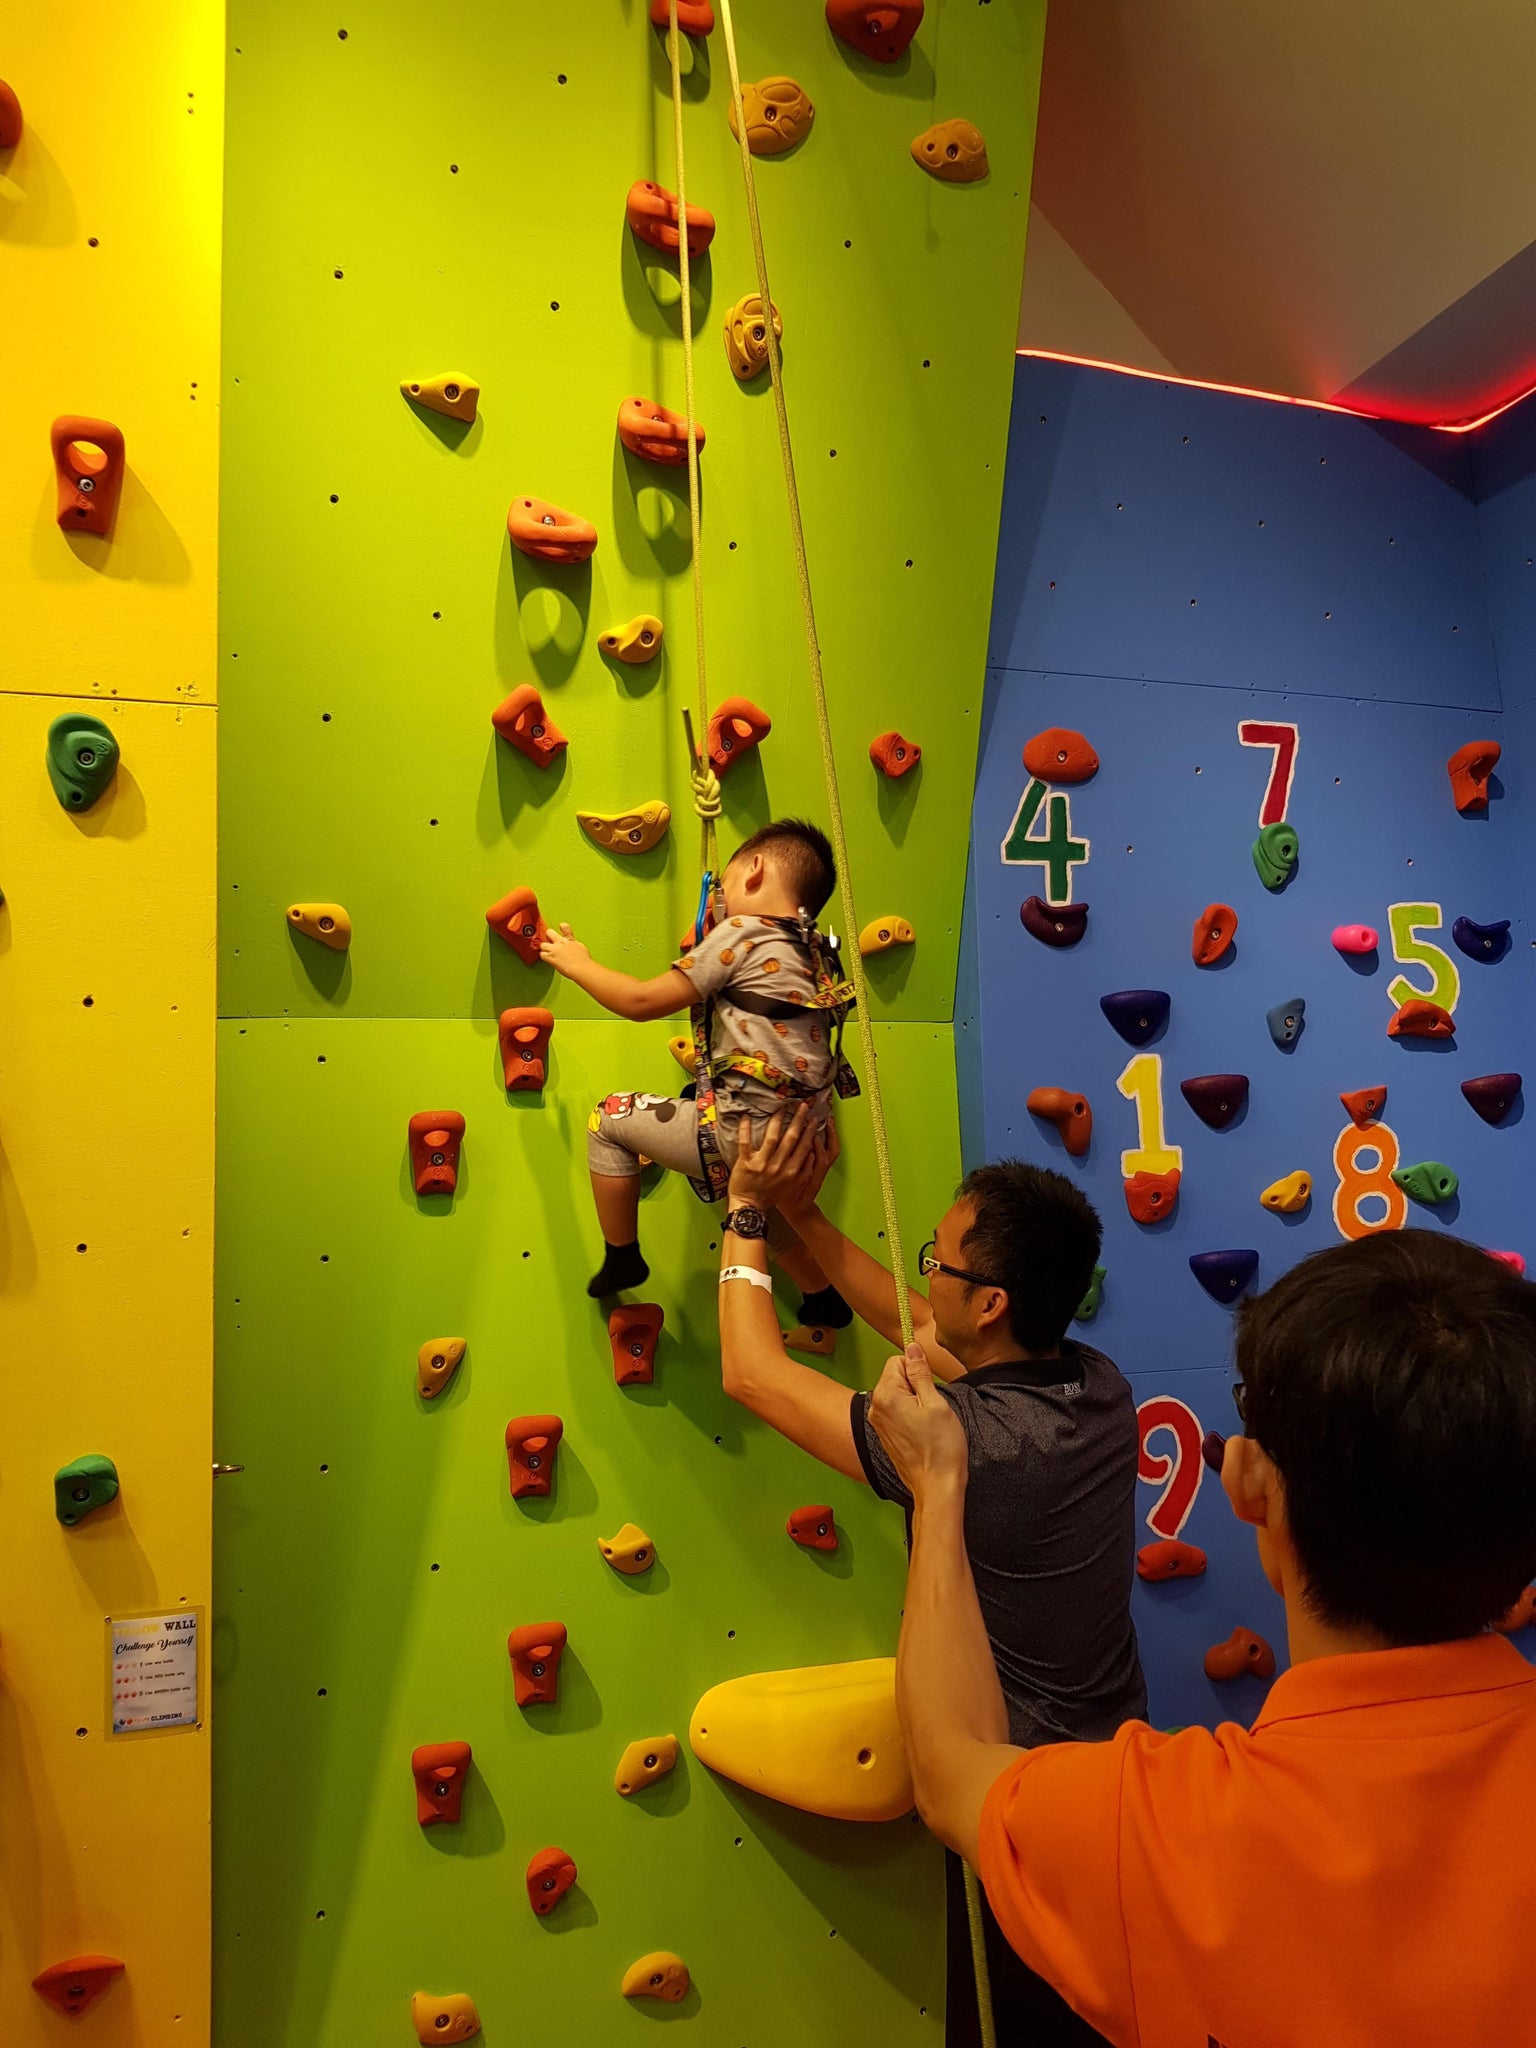 My Little Climbing Room - A new Climbing Room for Kids [BYKIDO MOMENTS]